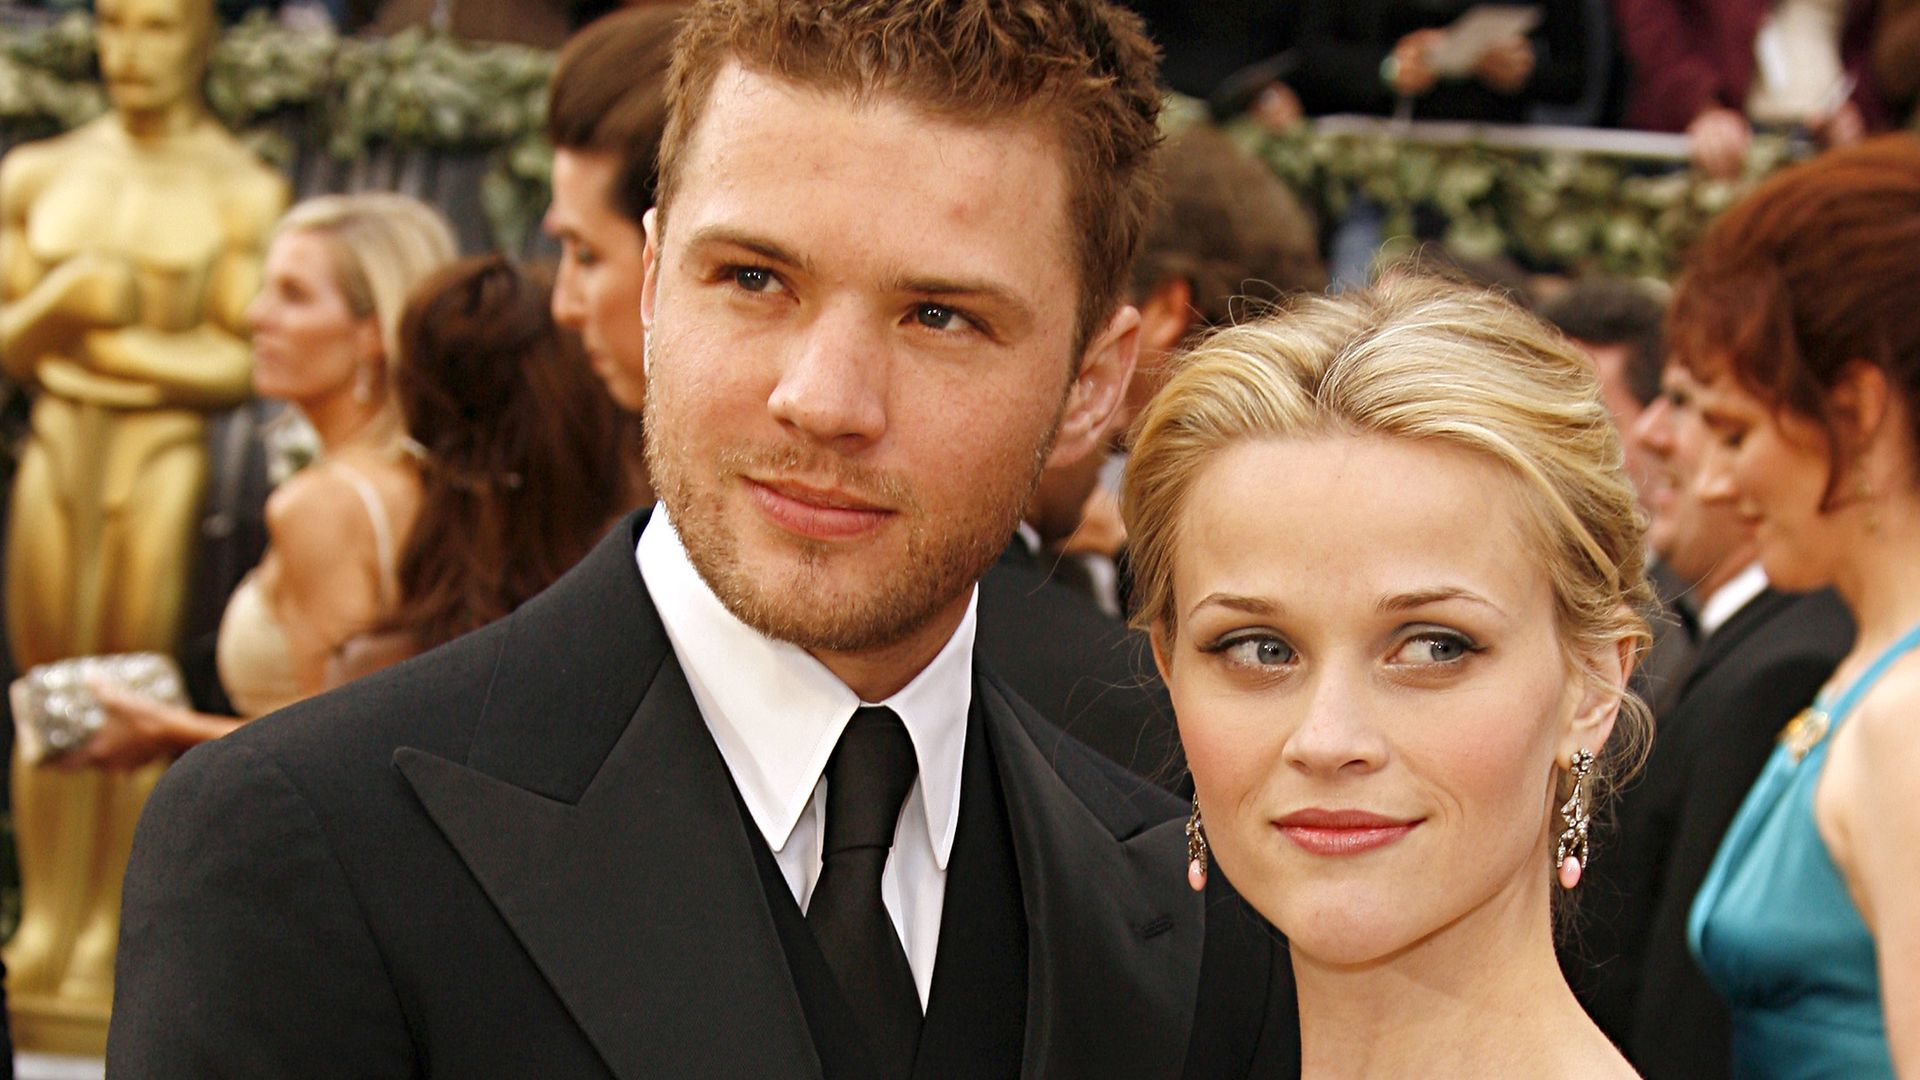 Ryan Phillippe and Reese Witherspoon at the Kodak Theatre in Hollywood, California 